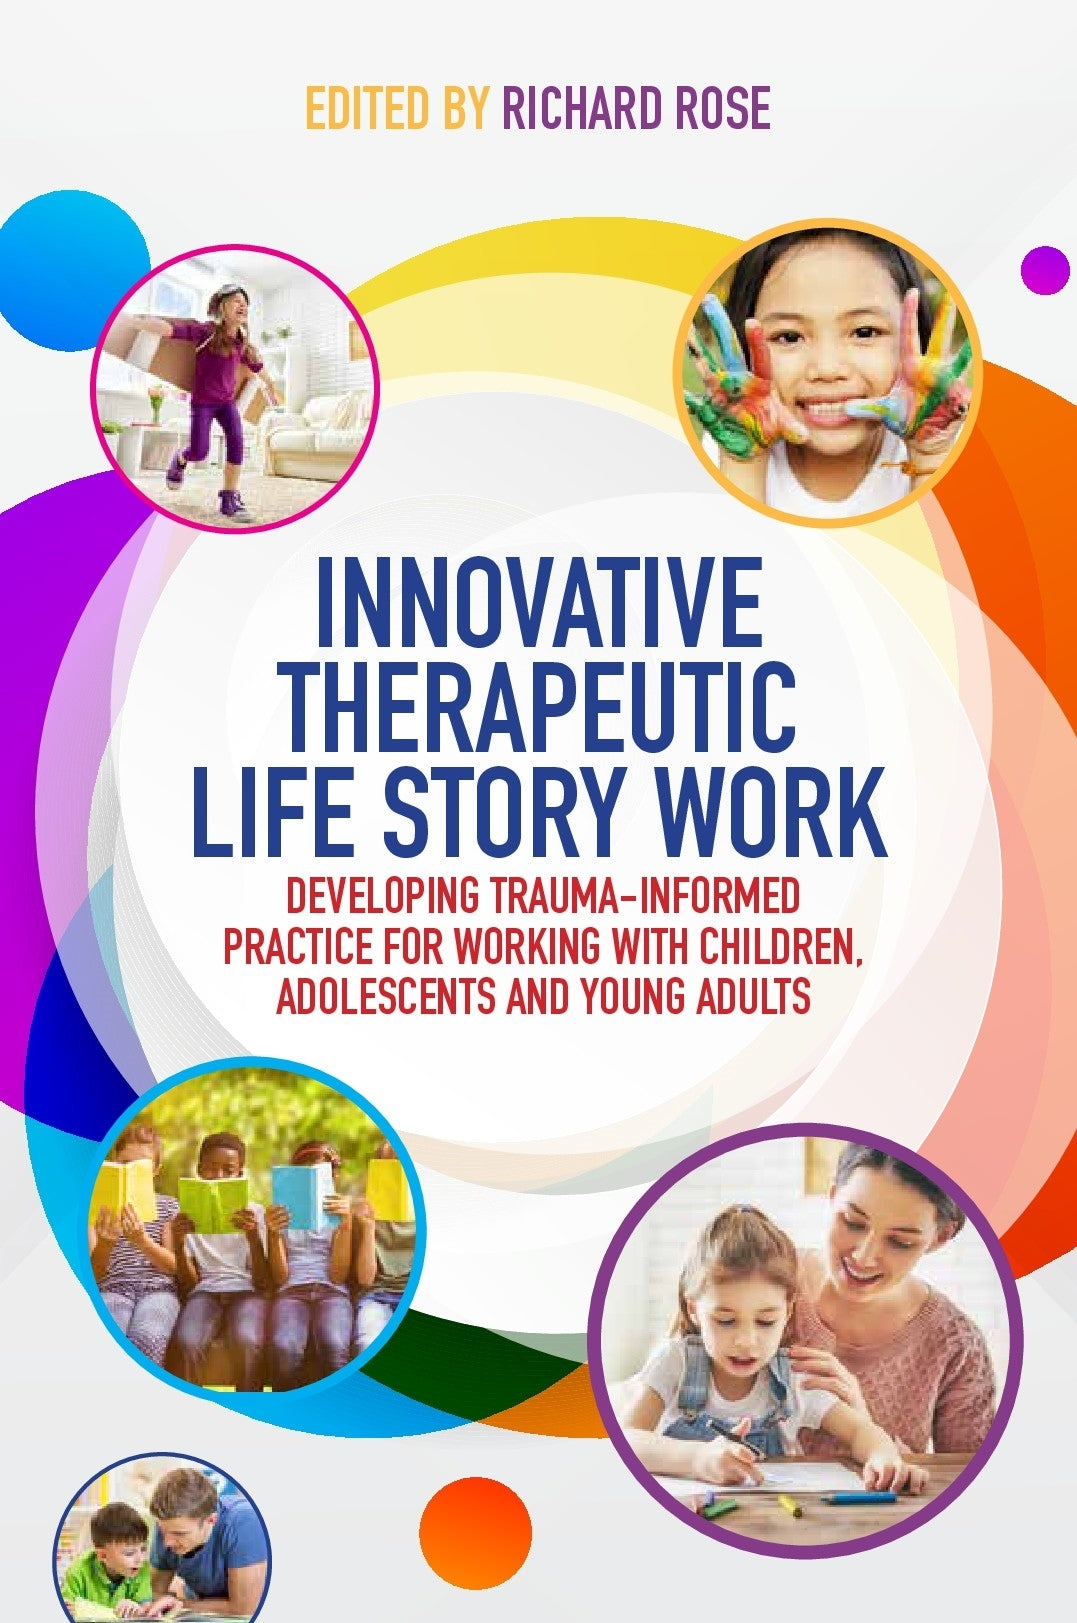 Innovative Therapeutic Life Story Work by Richard Rose, Deborah D. Gray, No Author Listed